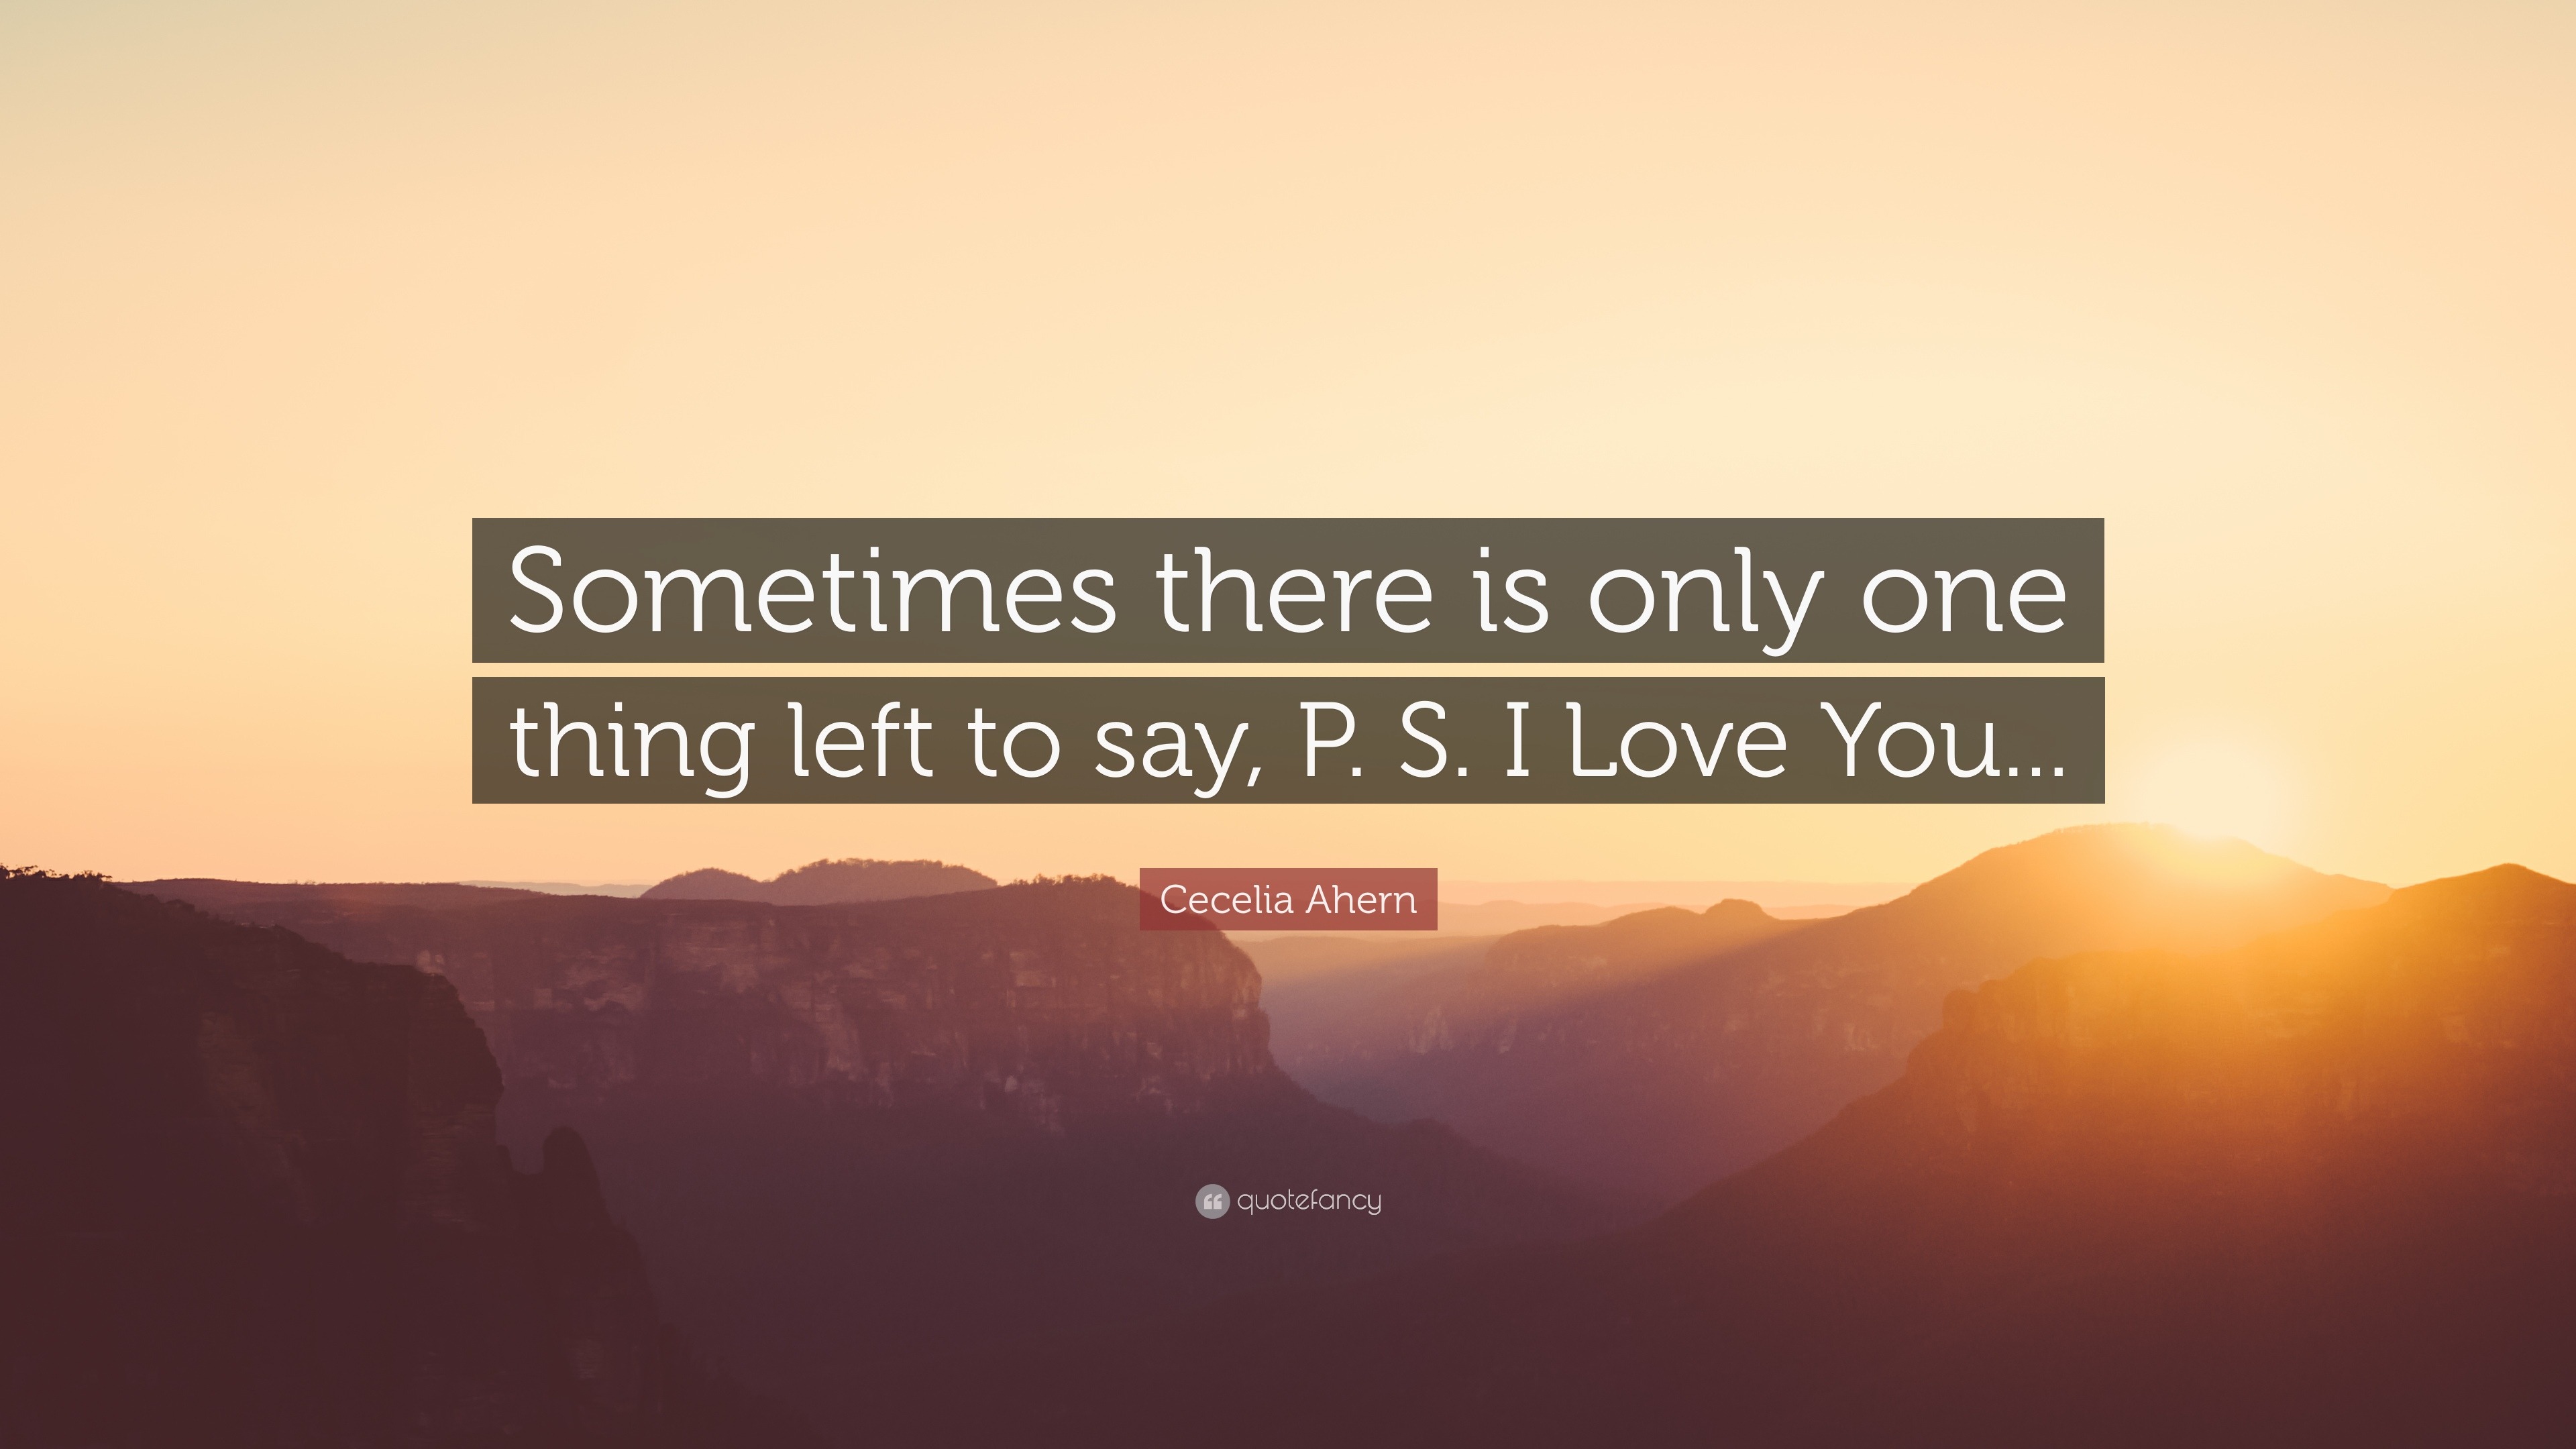 Cecelia Ahern Quote “Sometimes there is only one thing left to say P S